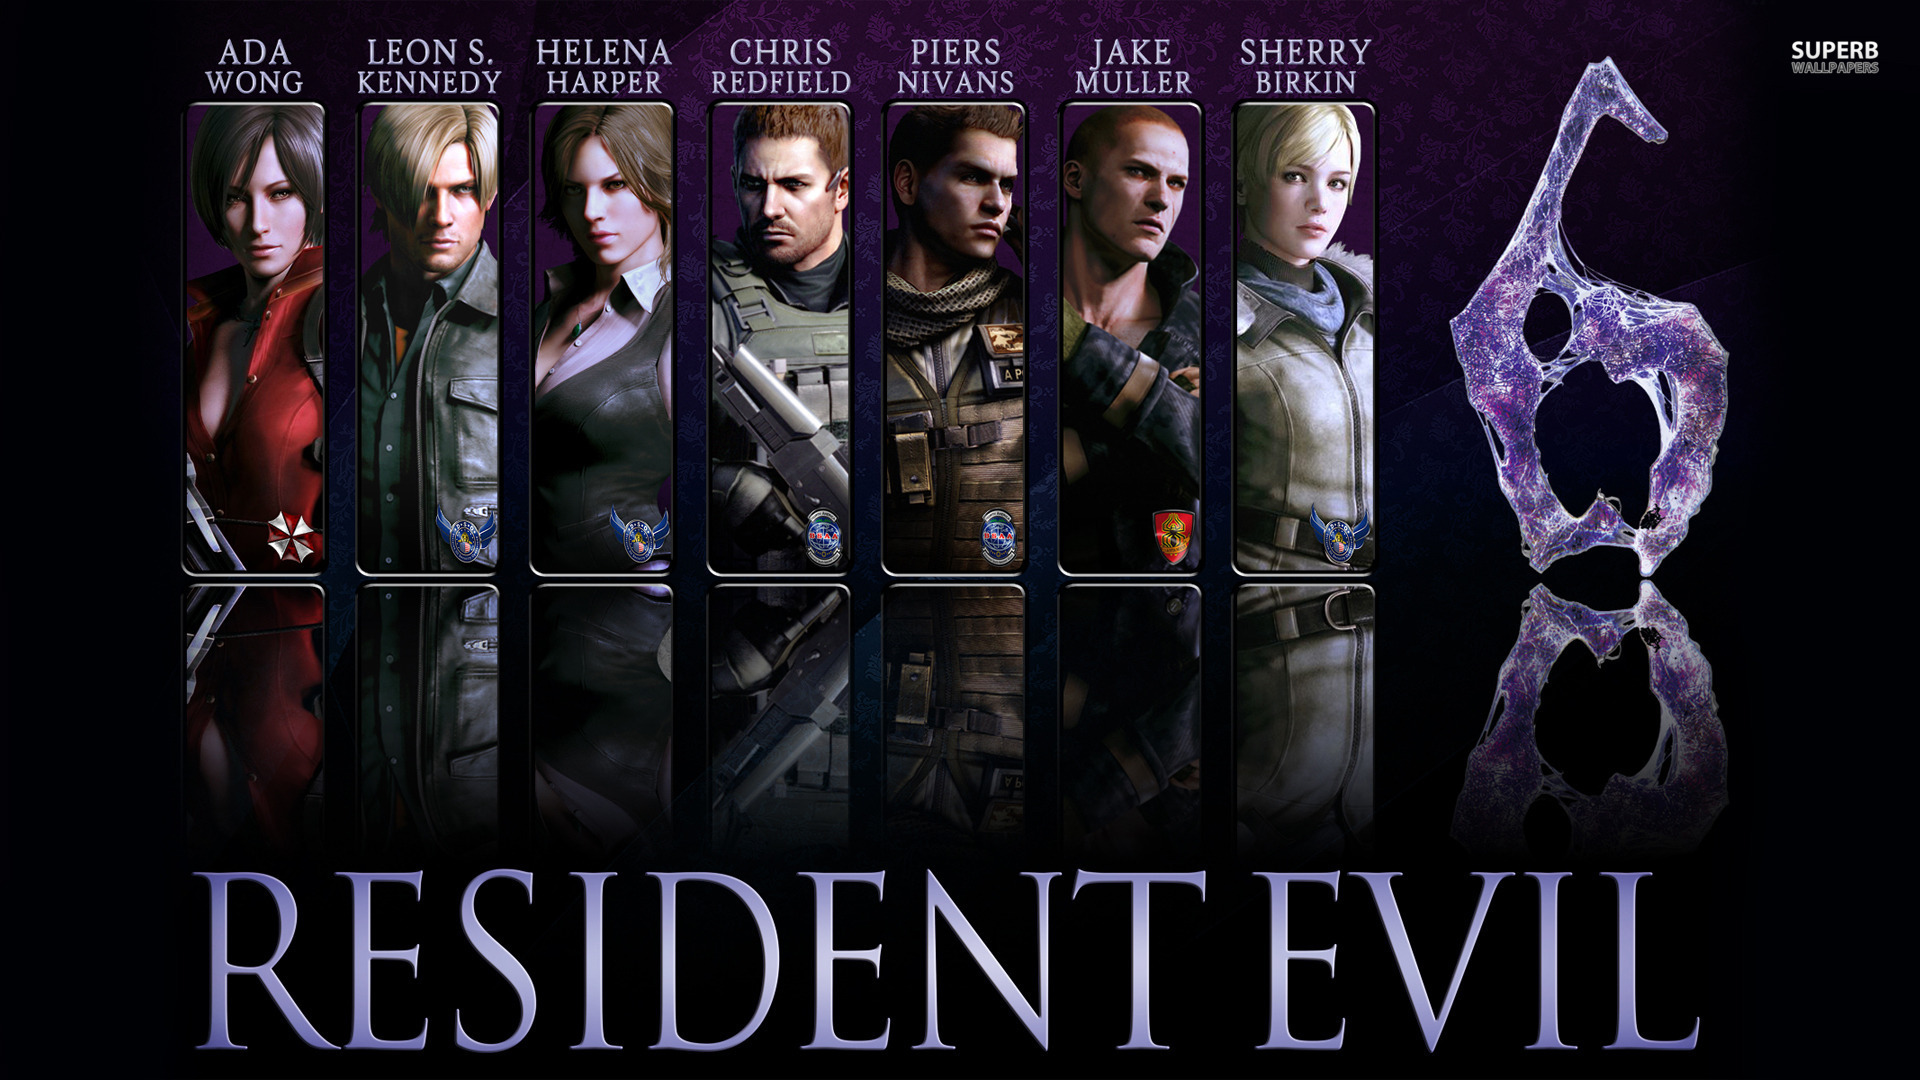 Resident Evil Wallpaper Excellent To Use